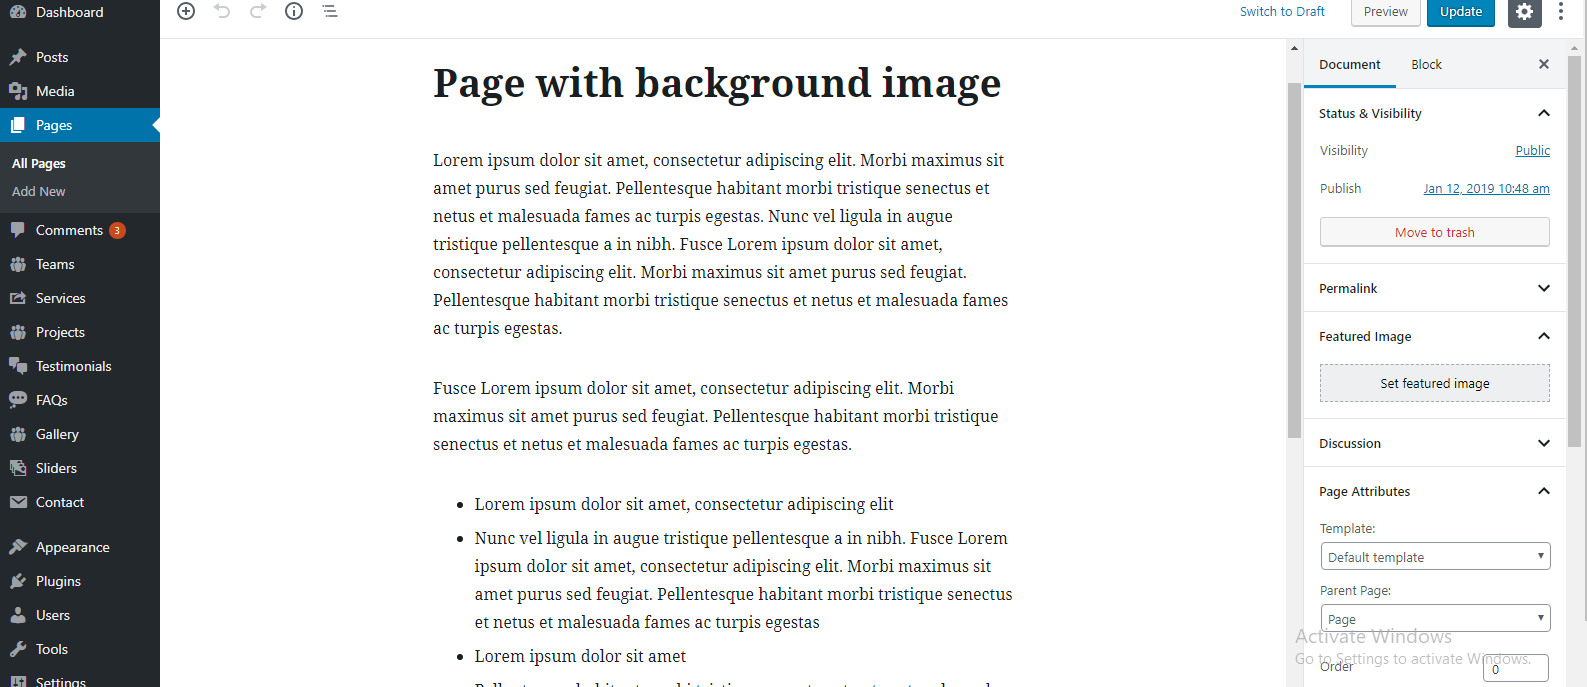 Page with background image